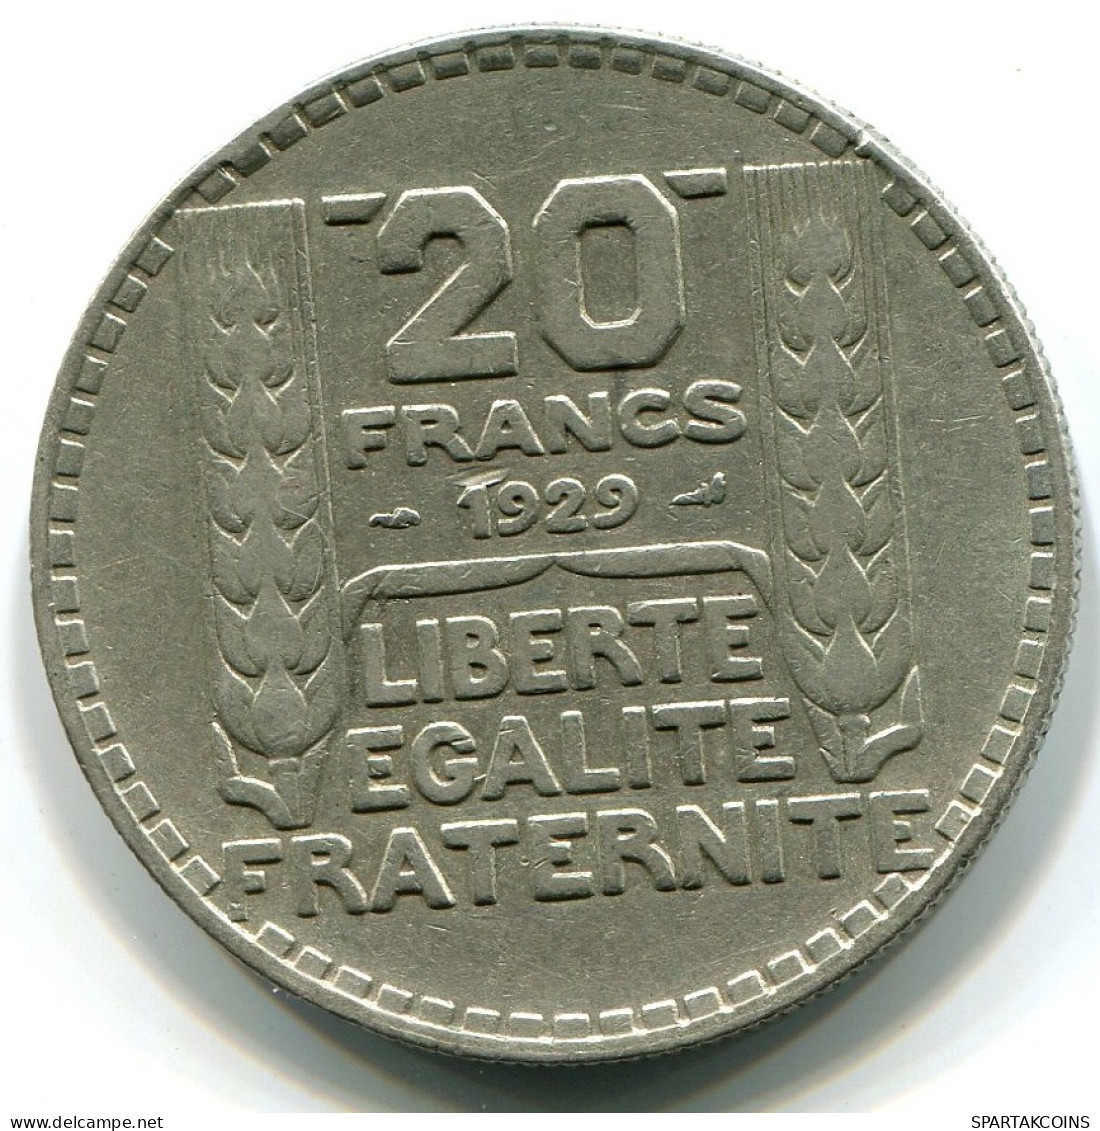 20 FRANCS 1929 FRANCE Coin SILVER XF #W10506.30 - 20 Francs